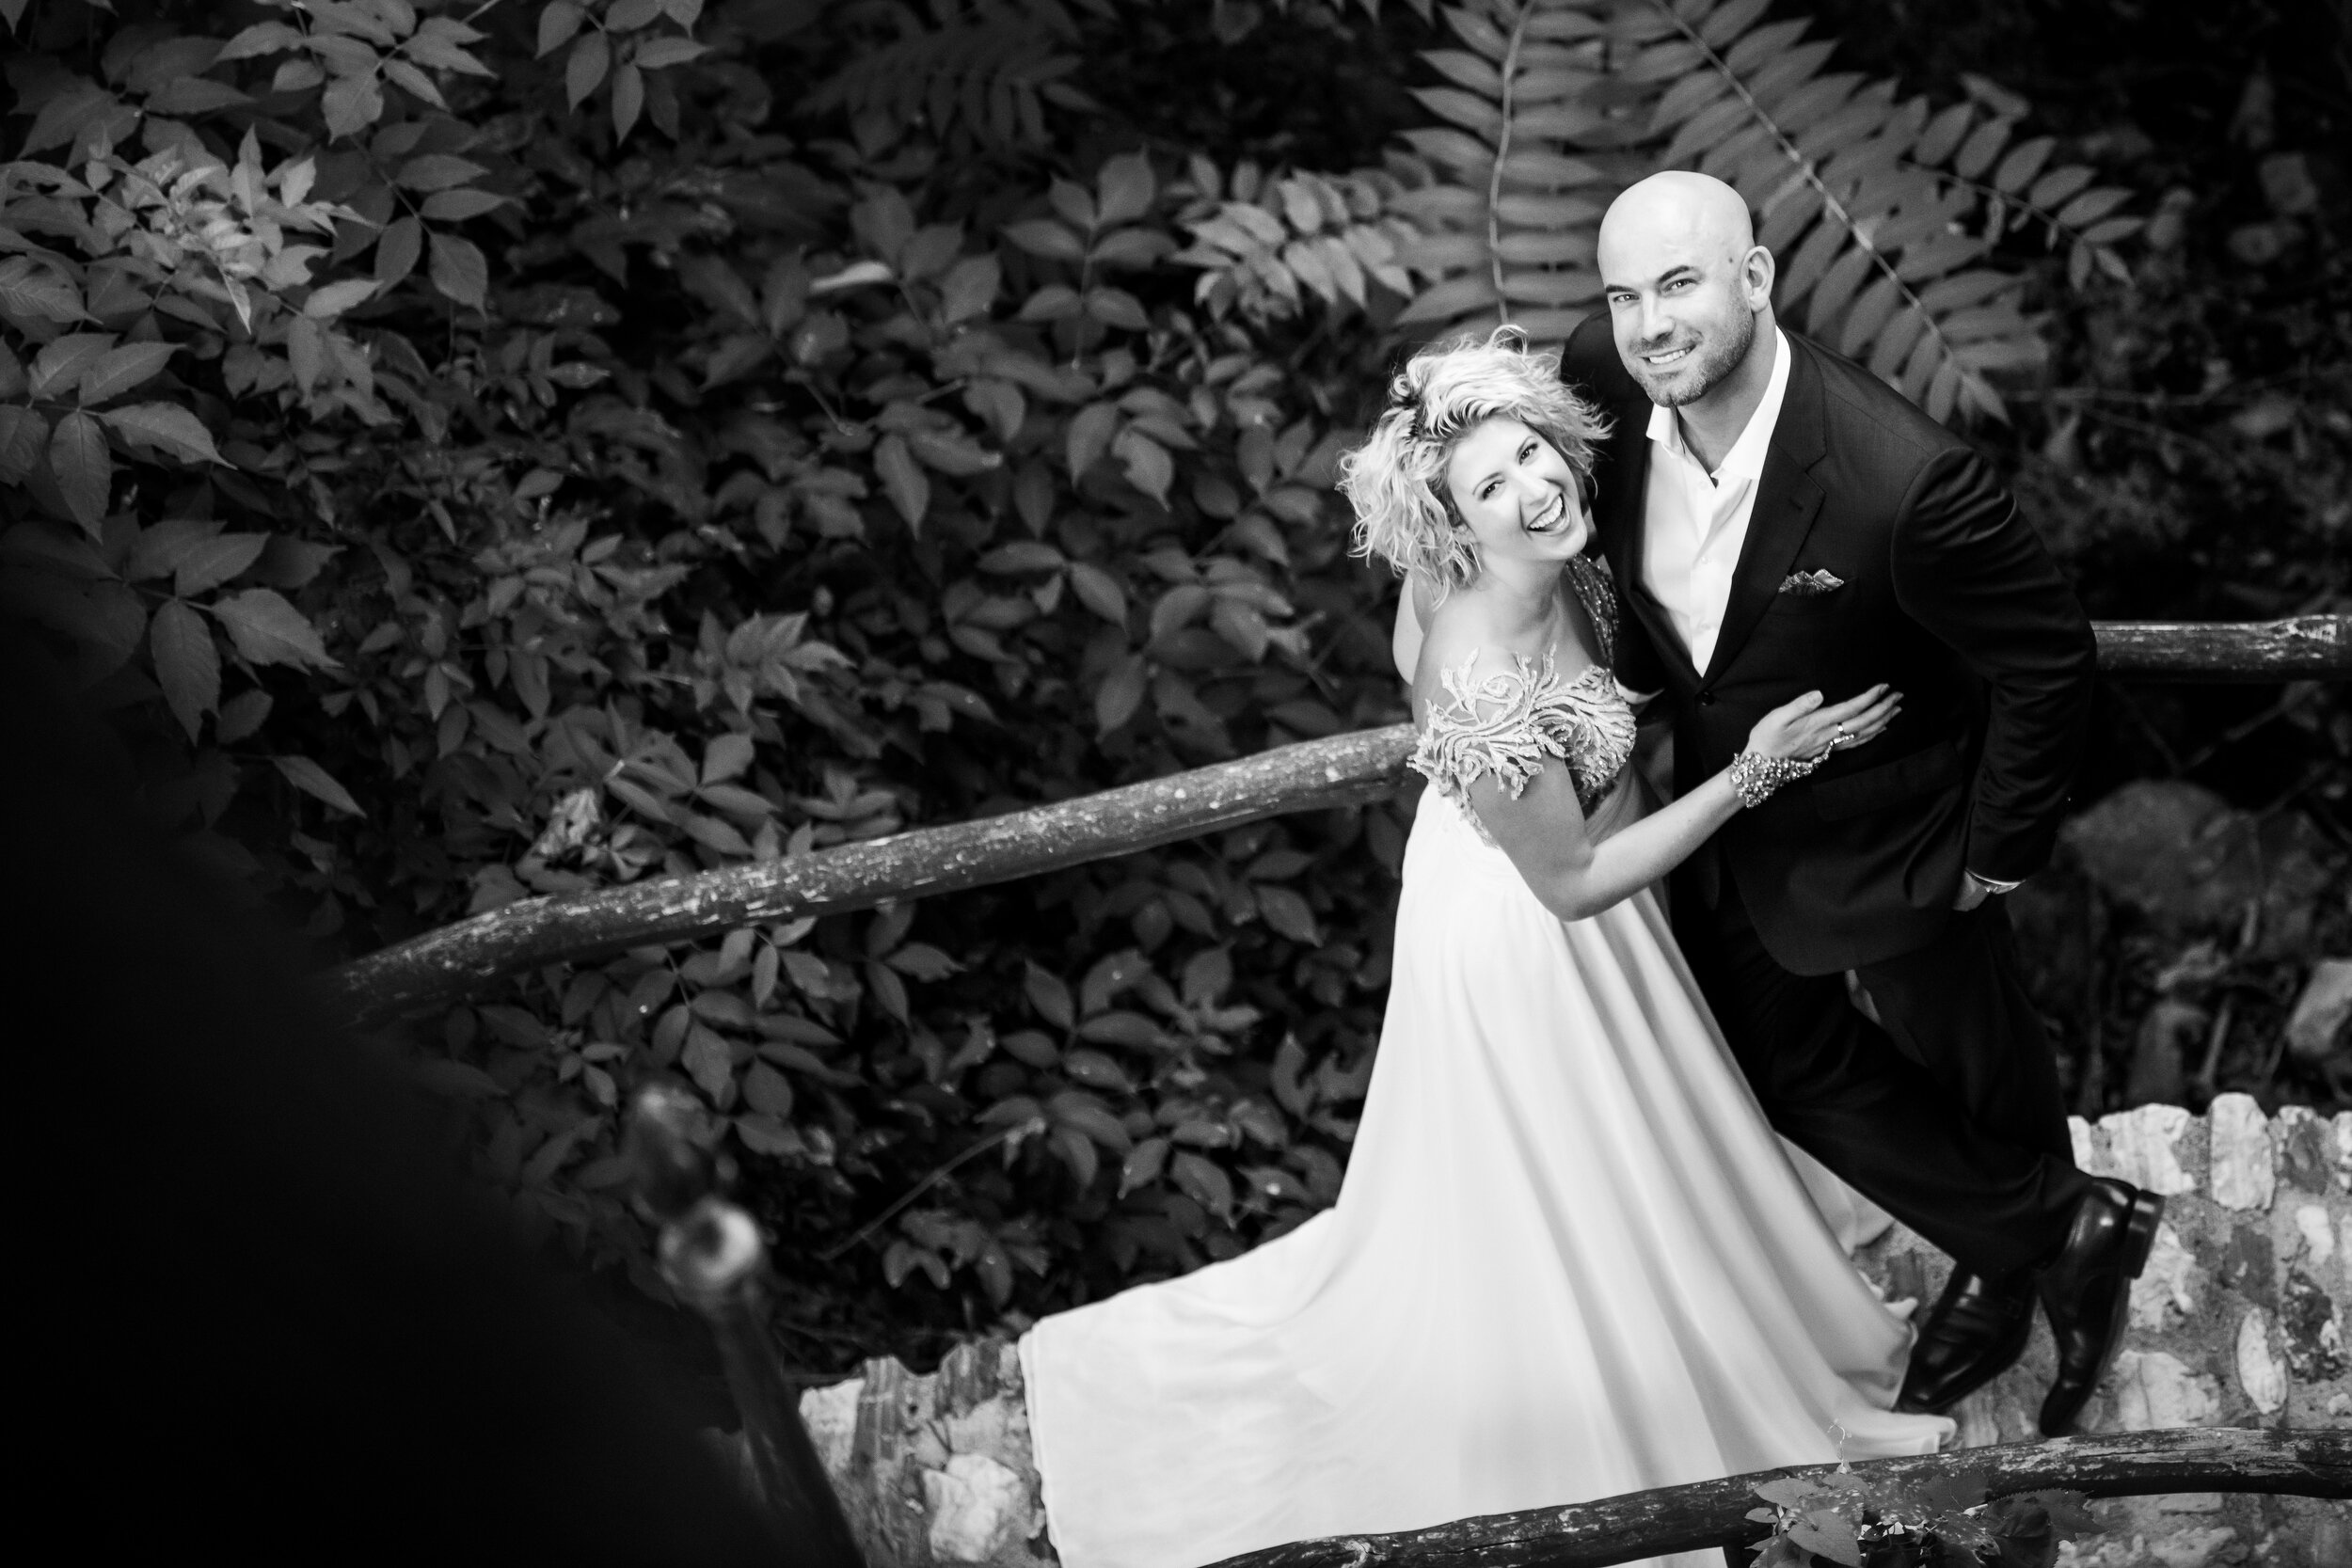 Bride and groom laugh during their wedding day portraits:  destination wedding photo at the Lost Unicorn Hotel, Tsagarada, Greece by J. Brown Photography.